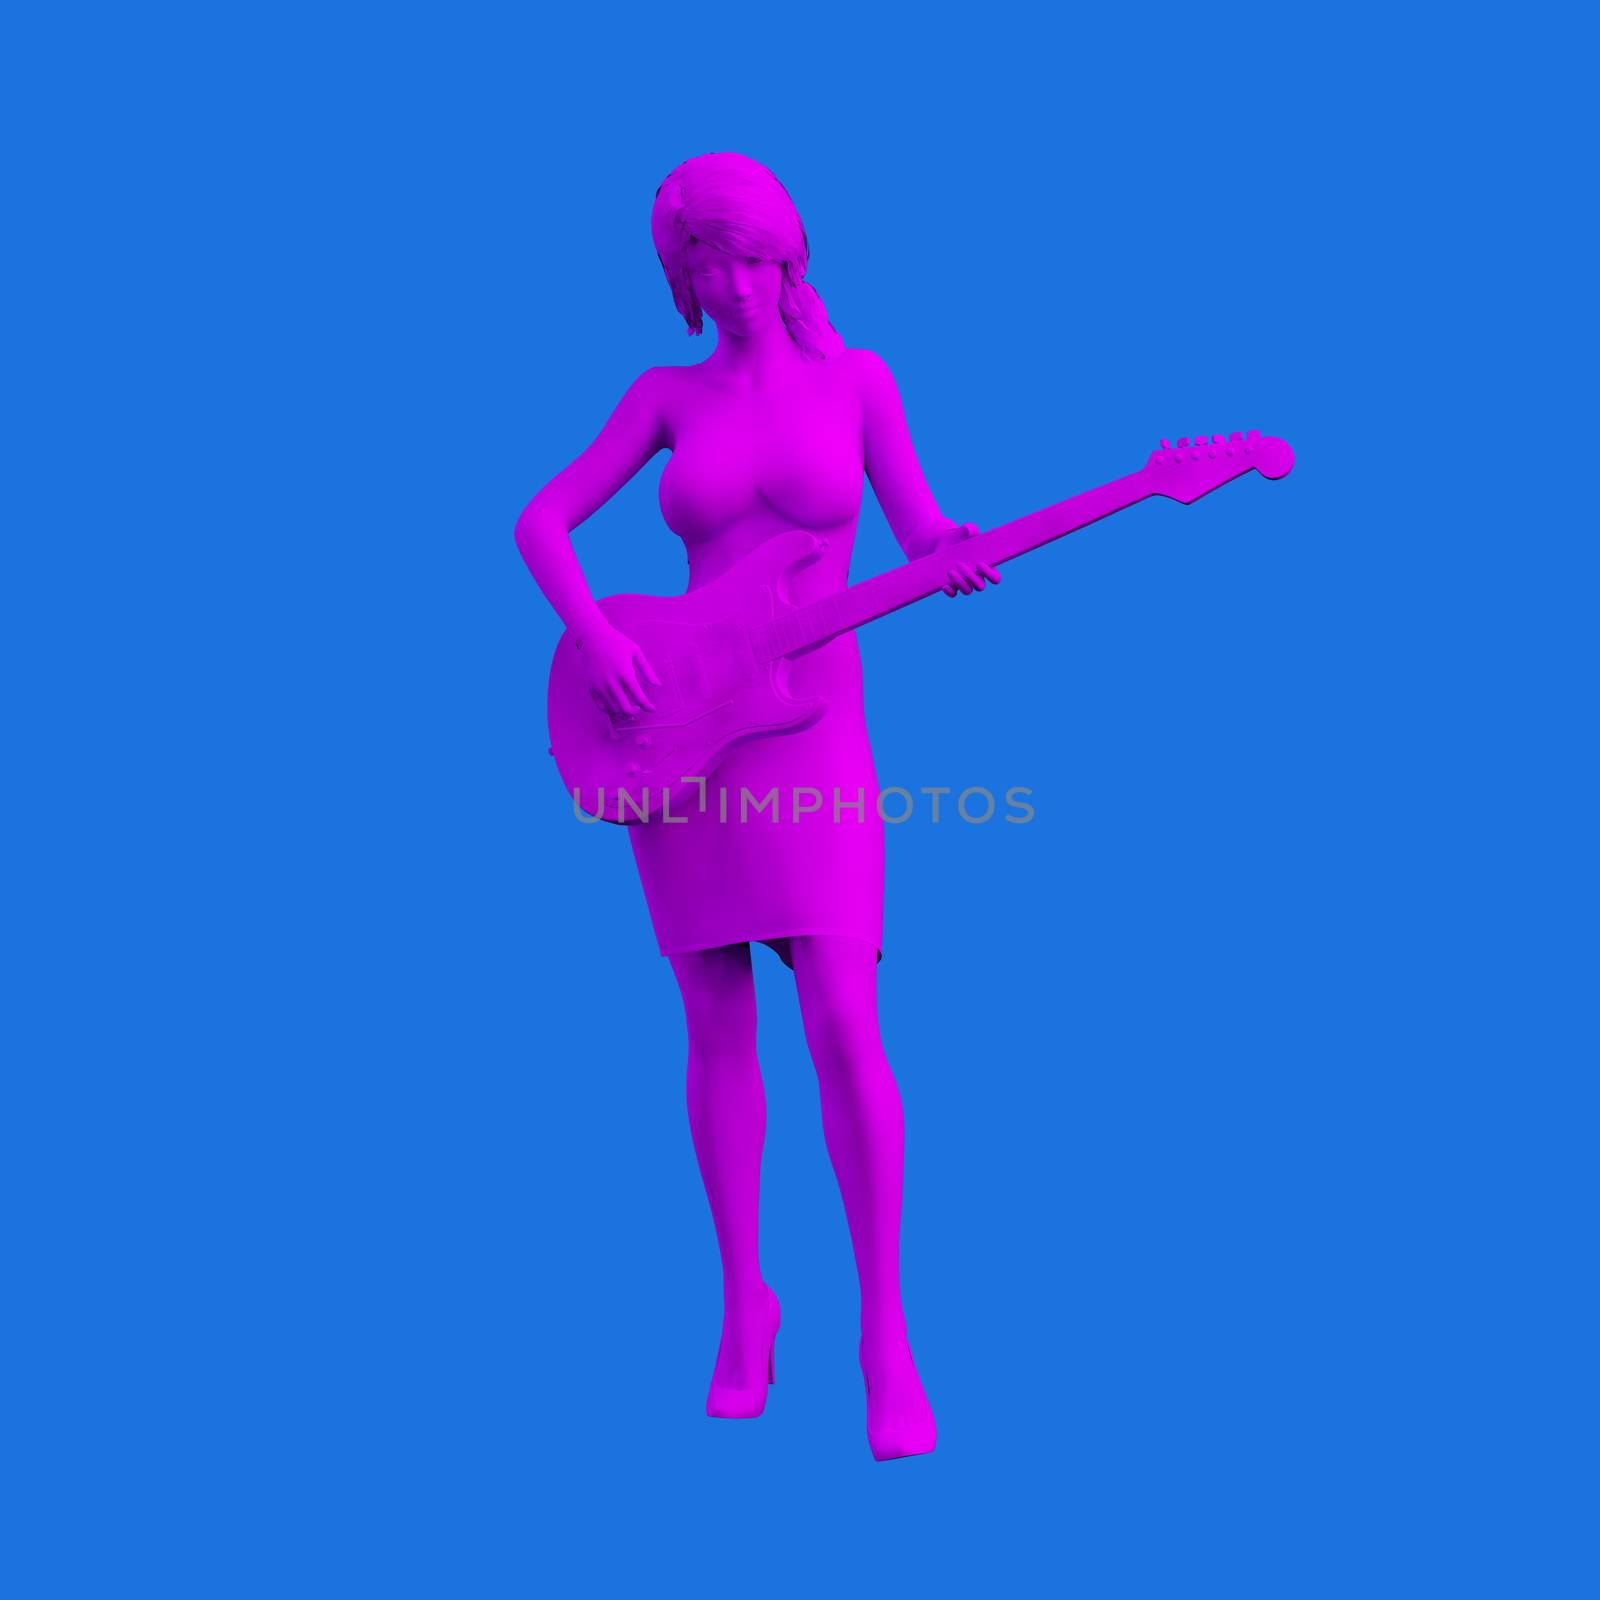 Guitar Player Musician Playing in Concert Concept